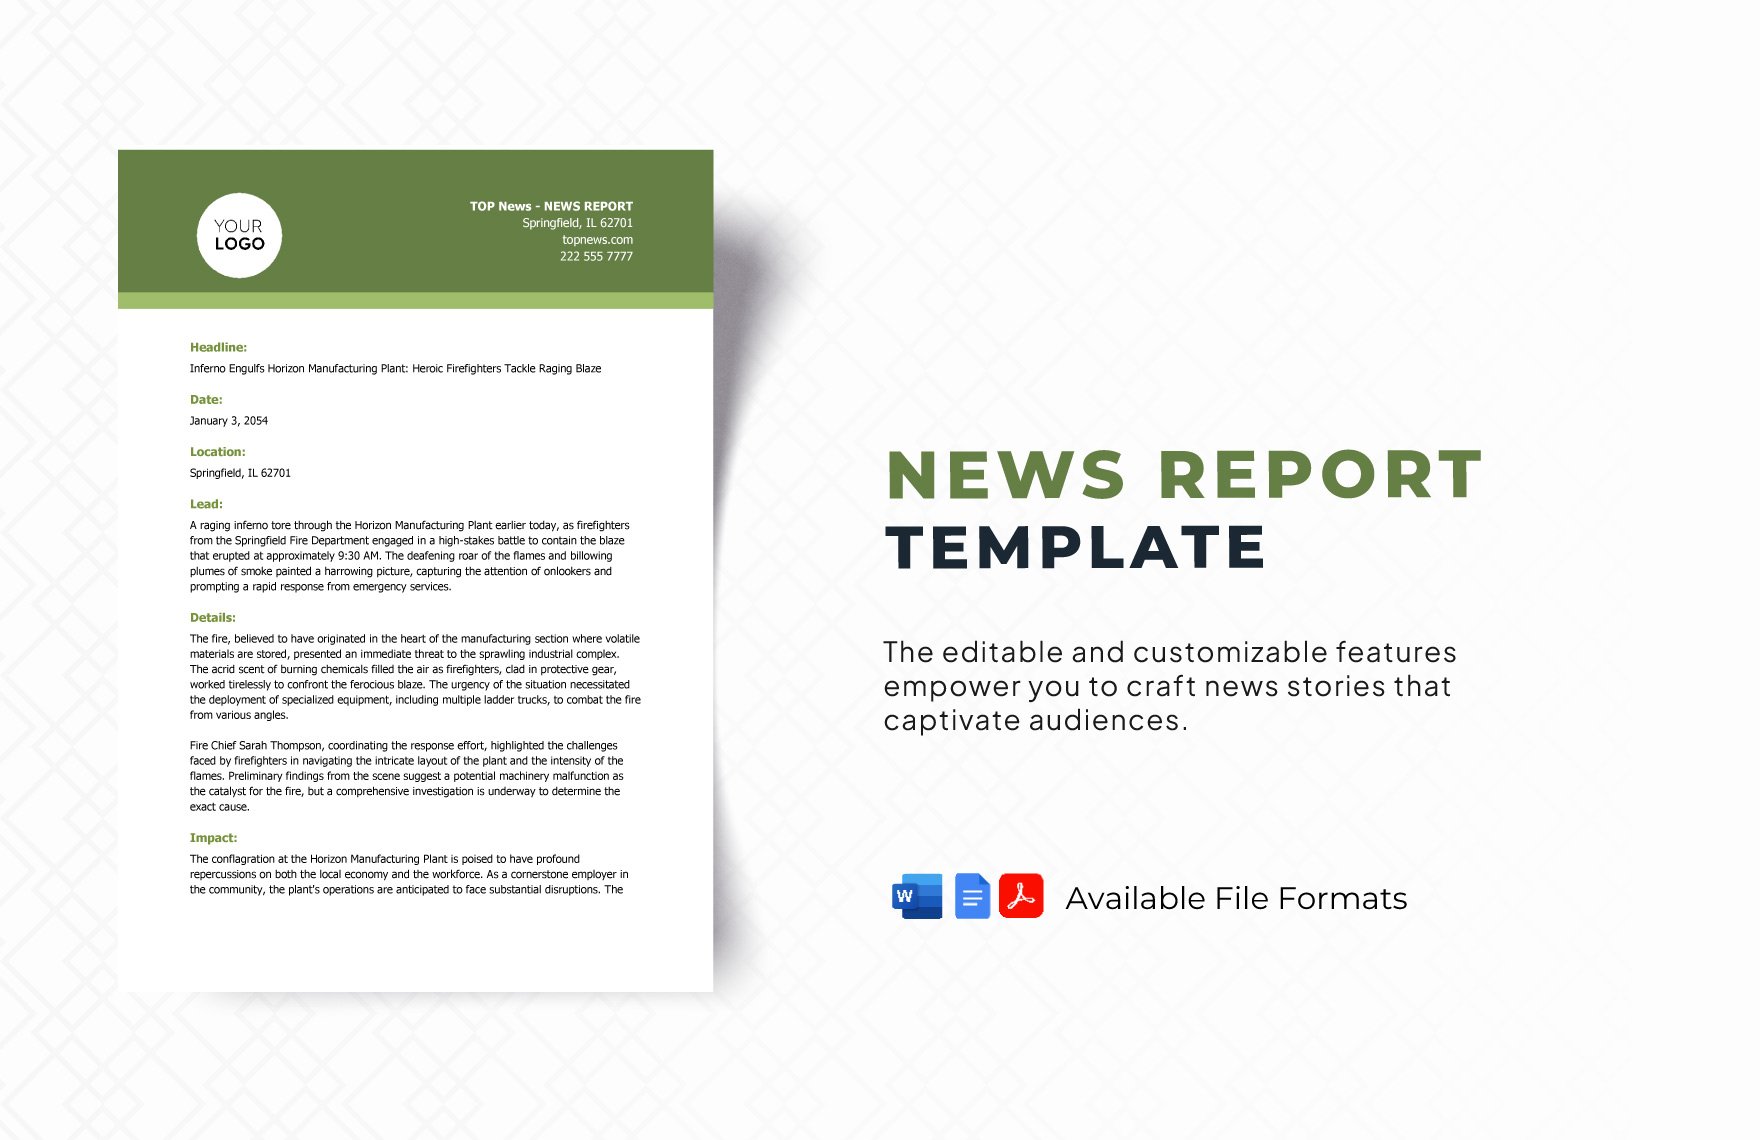 News Report Template in Word, Google Docs, PDF